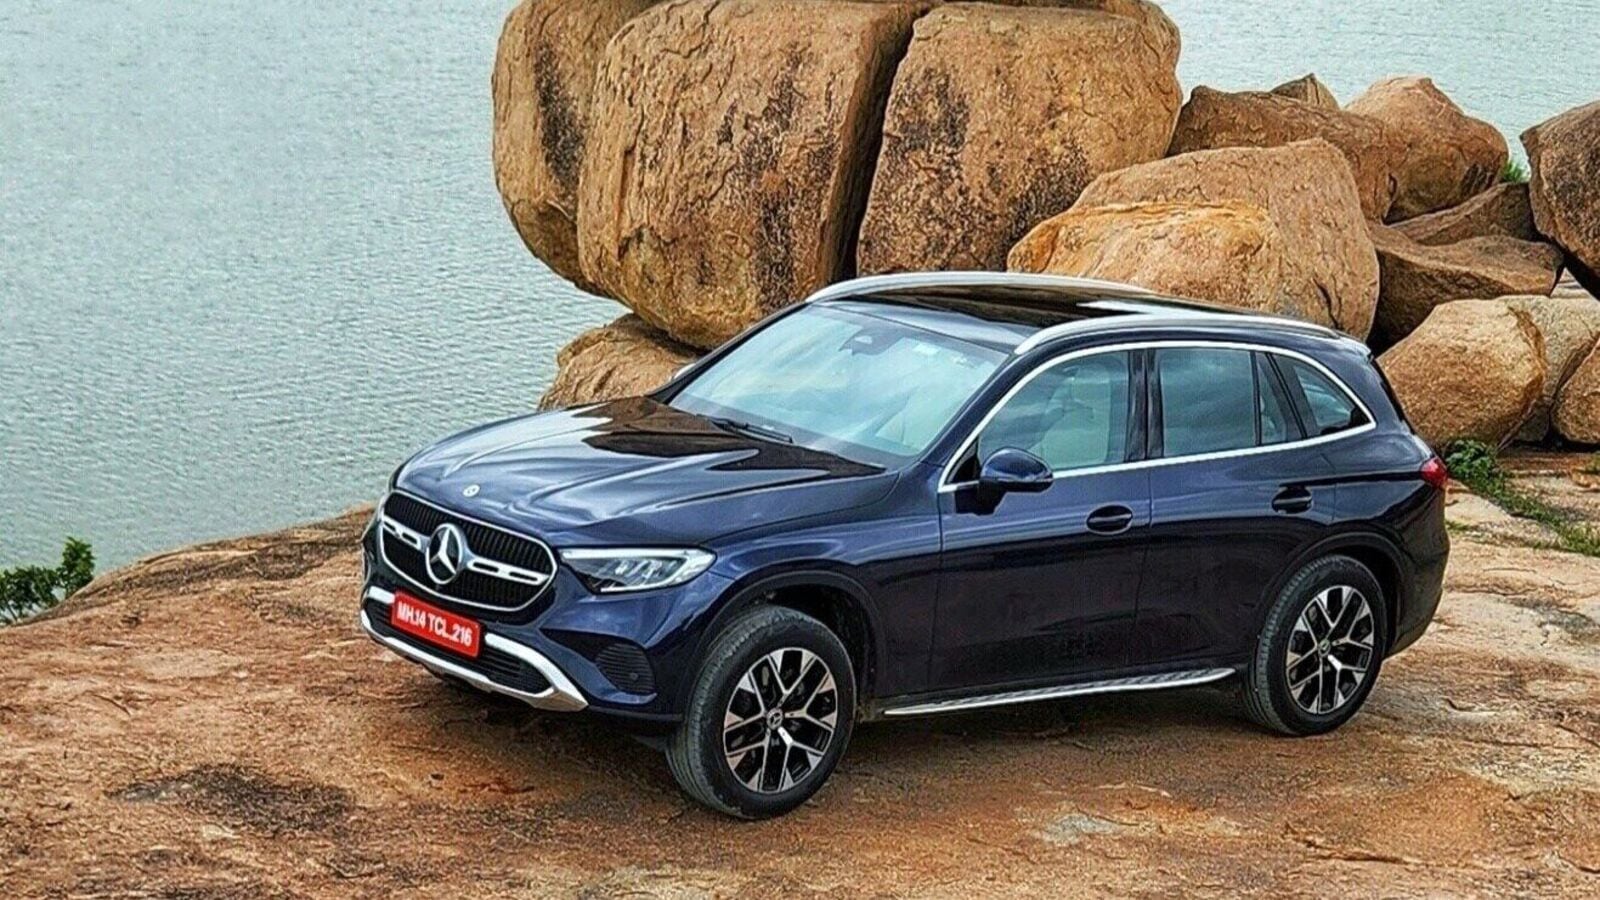 New-gen Mercedes-Benz GLC: What's changed on brand's bestselling